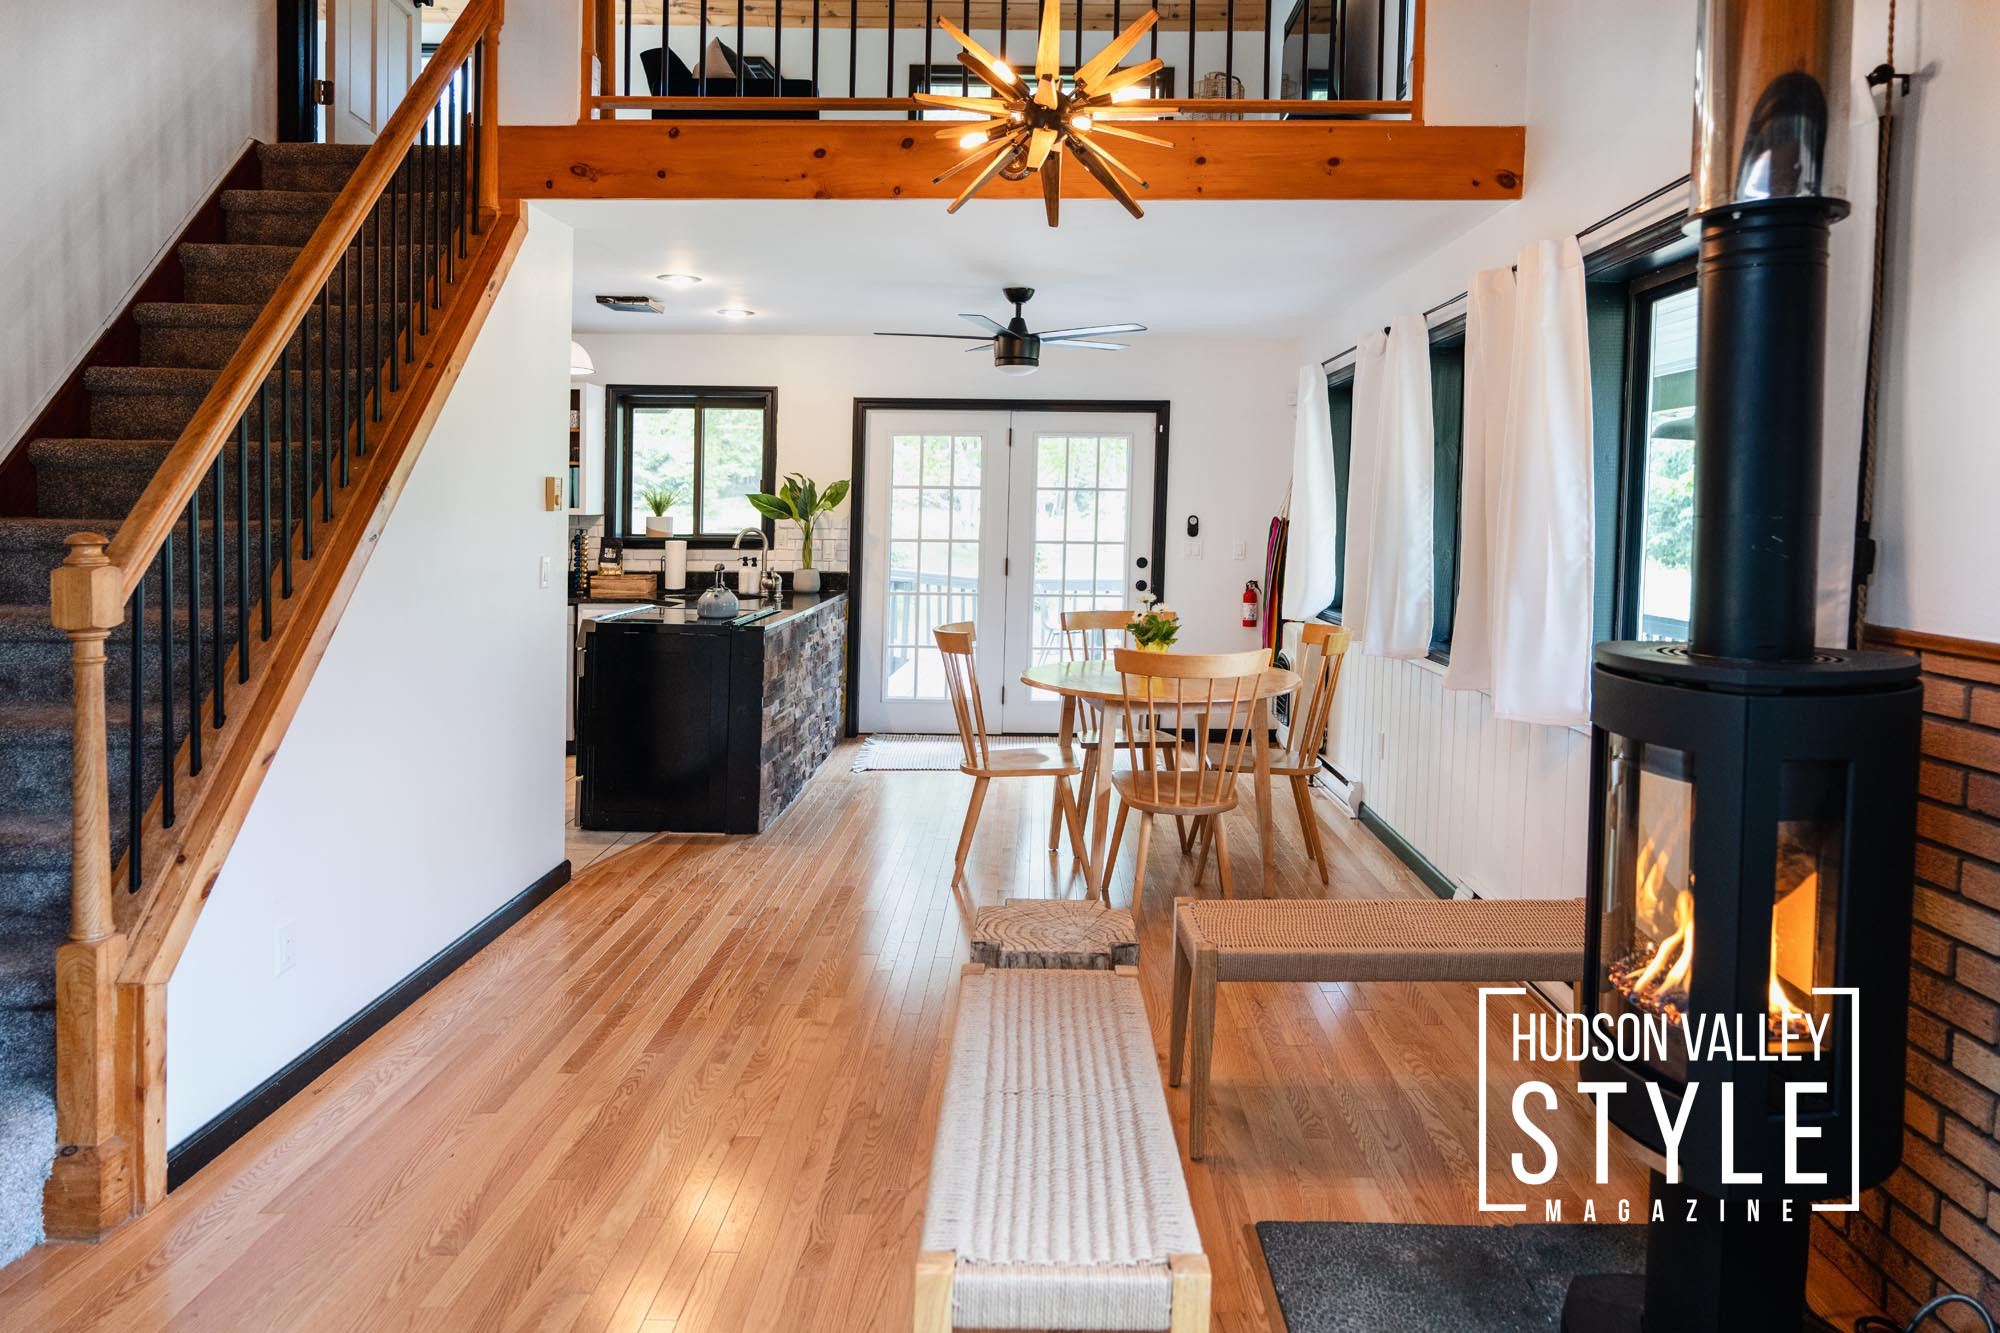 Tips for Finding the Best Airbnb in the Hudson Valley